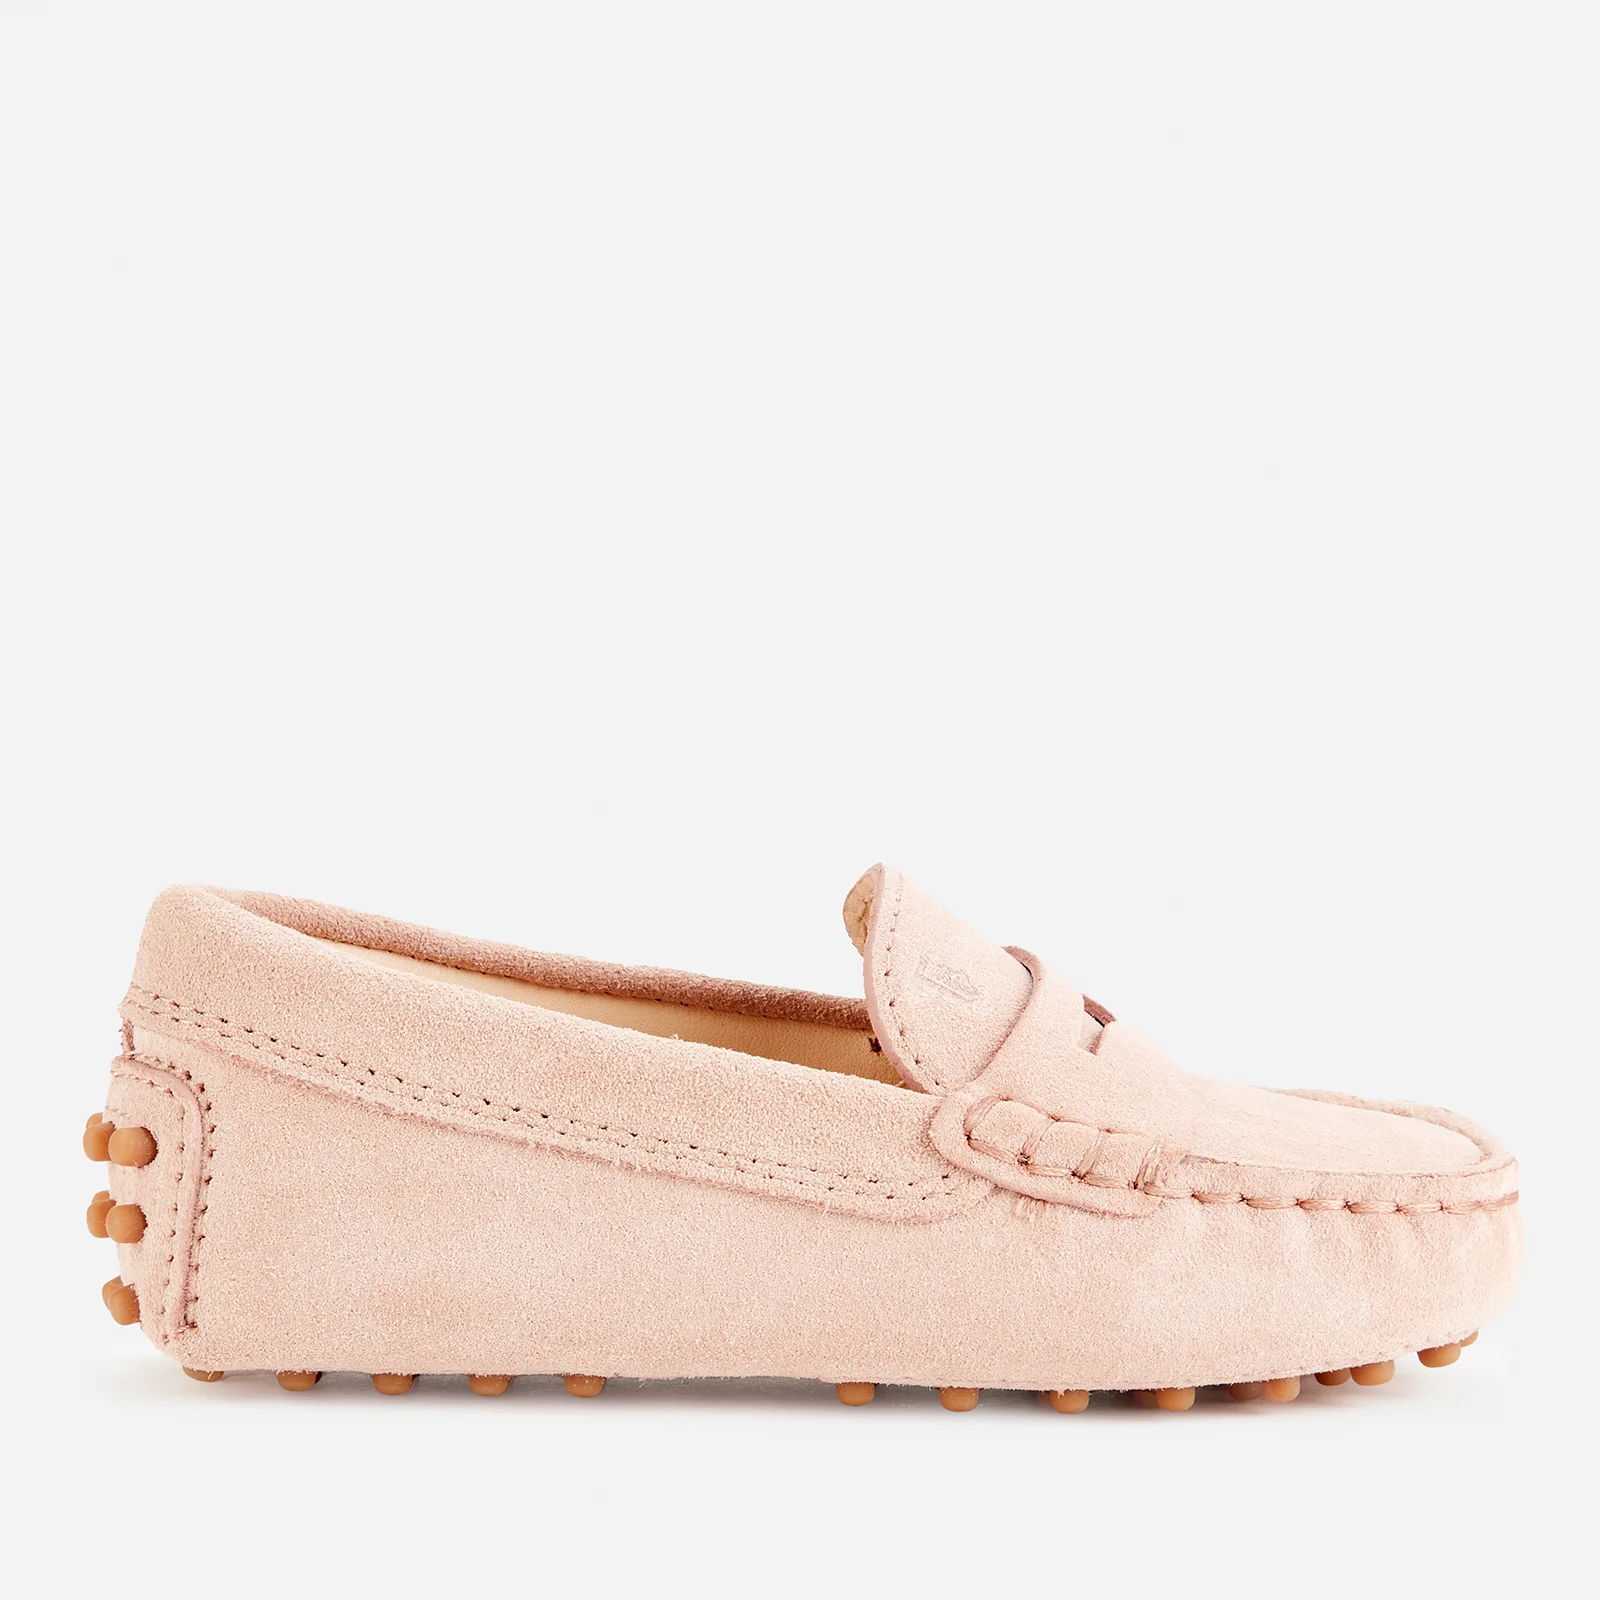 Tods Toddlers' Suede Moccasin Loafers - Ballerina Image 1